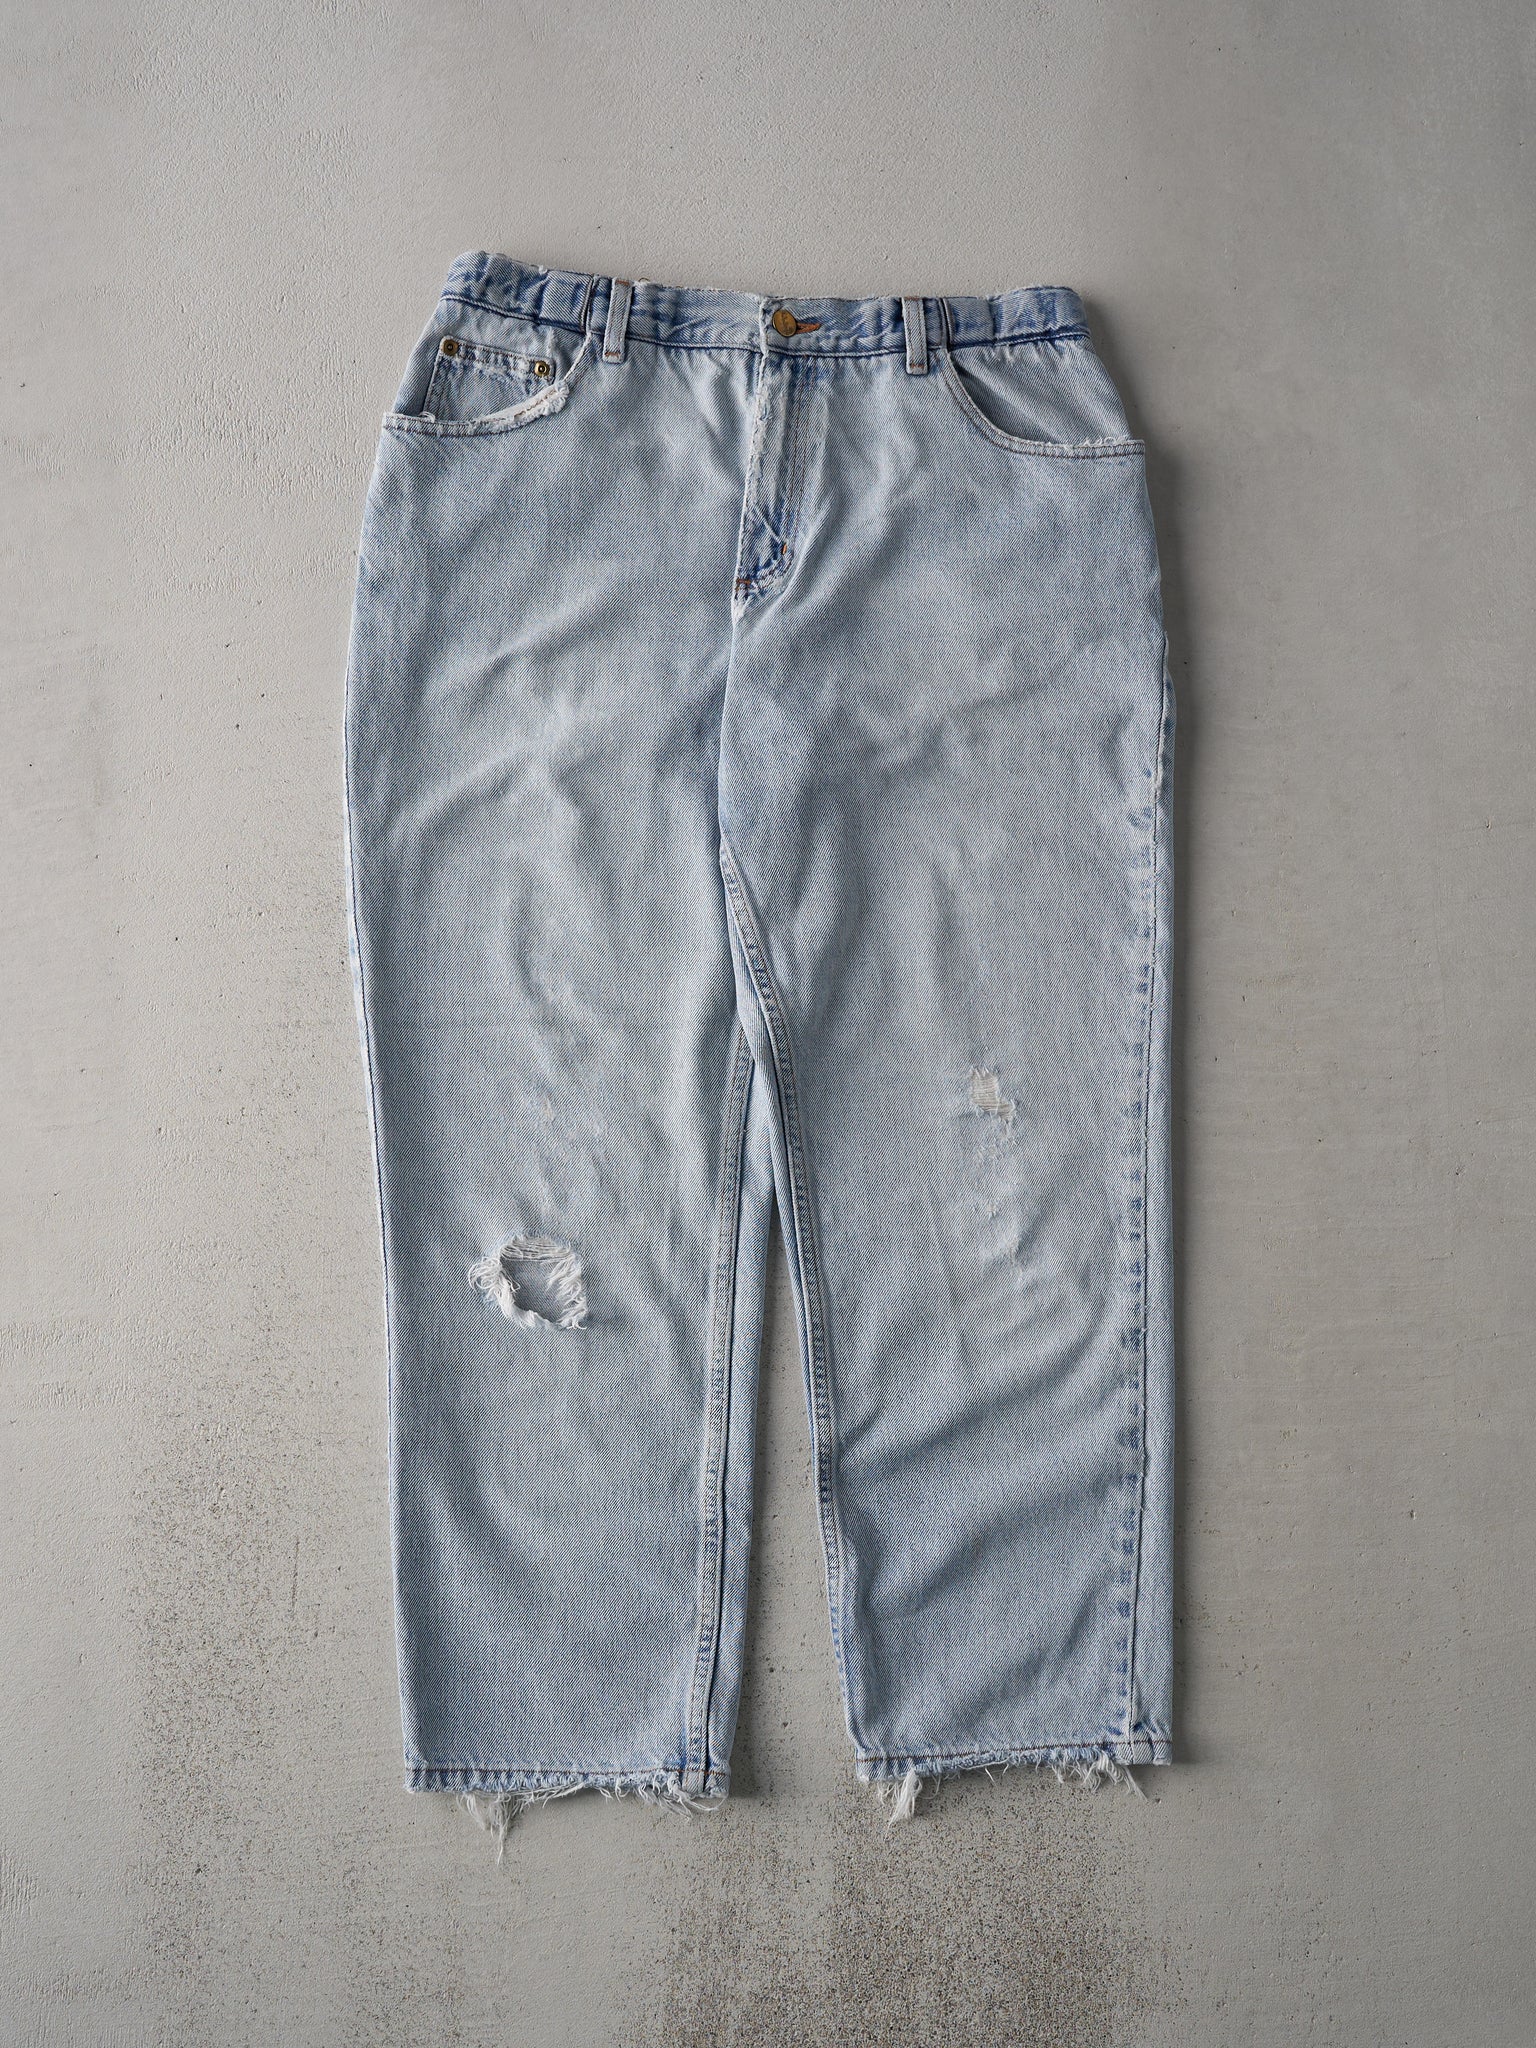 Vintage 90s Light Wash LL Bean Relaxed Fit Jeans (32x27)